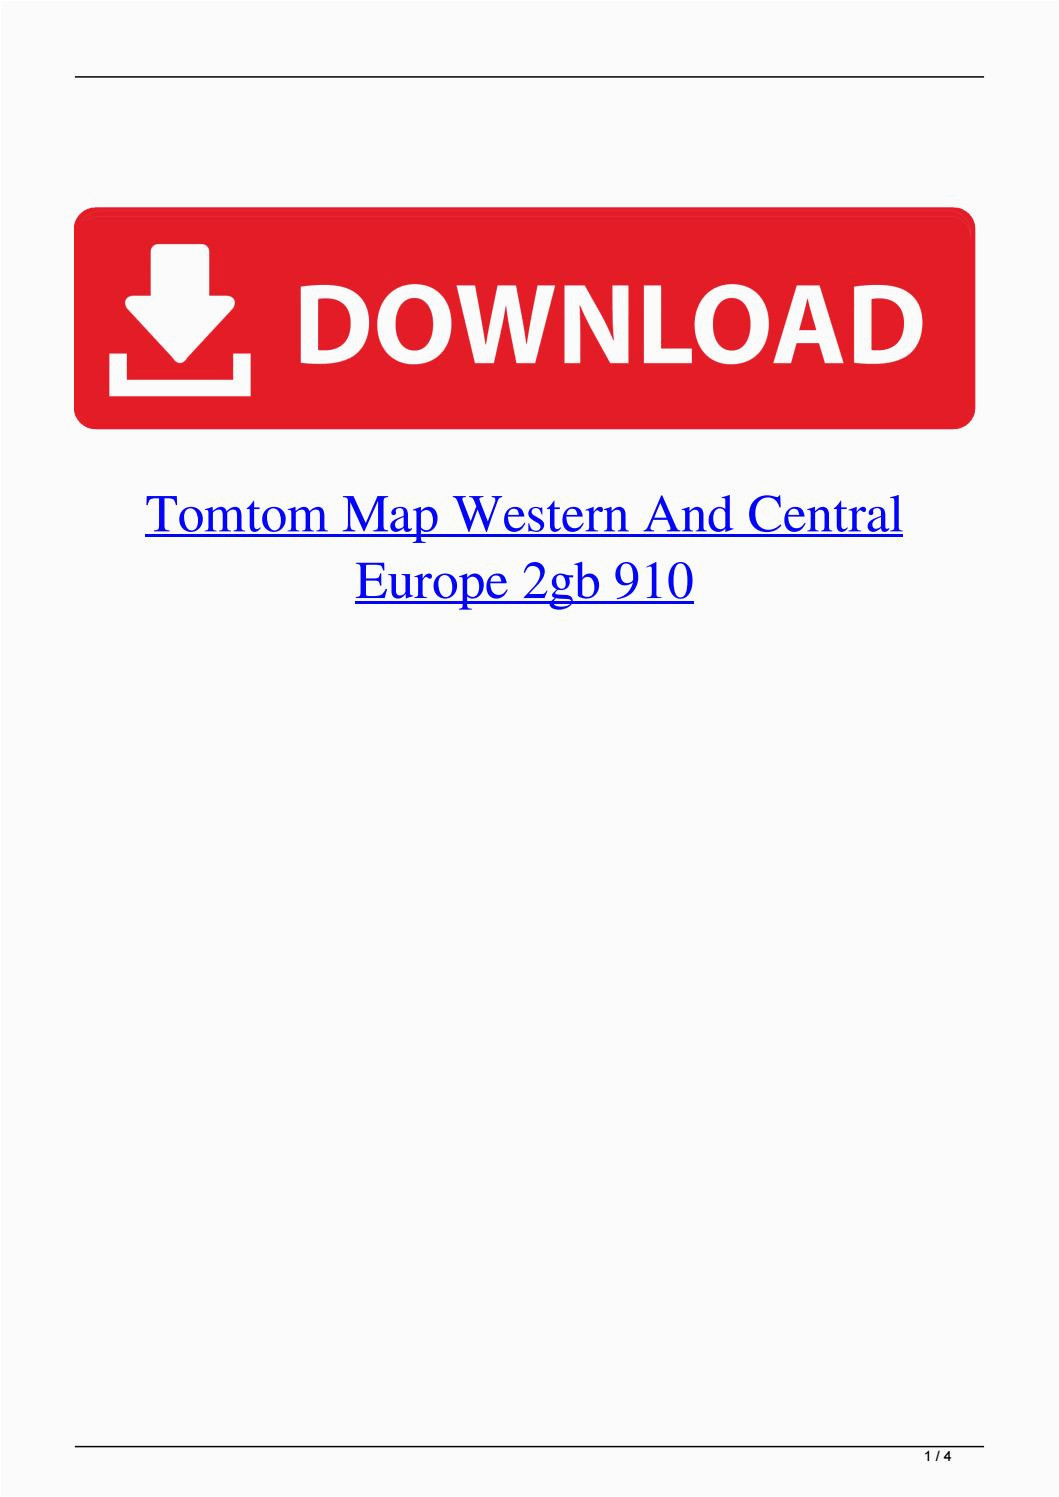 tomtom map western and central europe 2gb 910 by acbenlinkbe